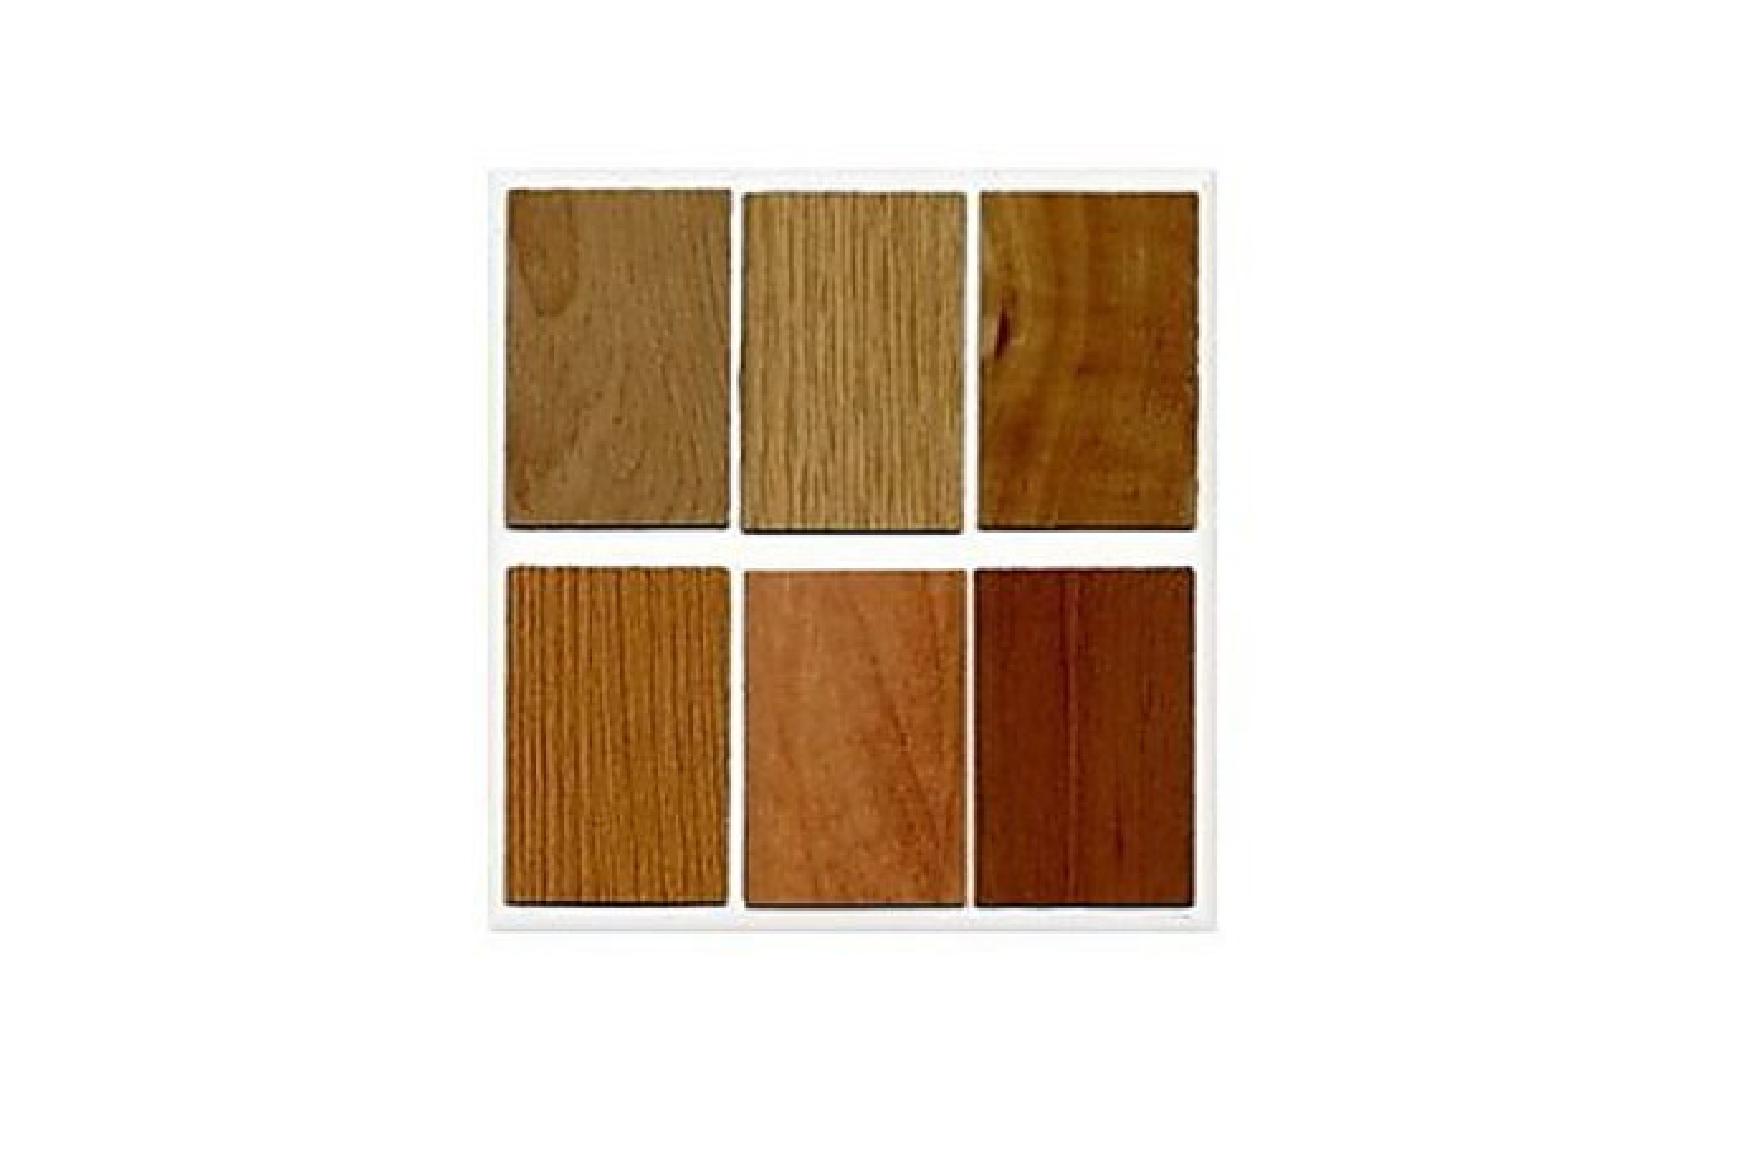 Hj traders plywood products